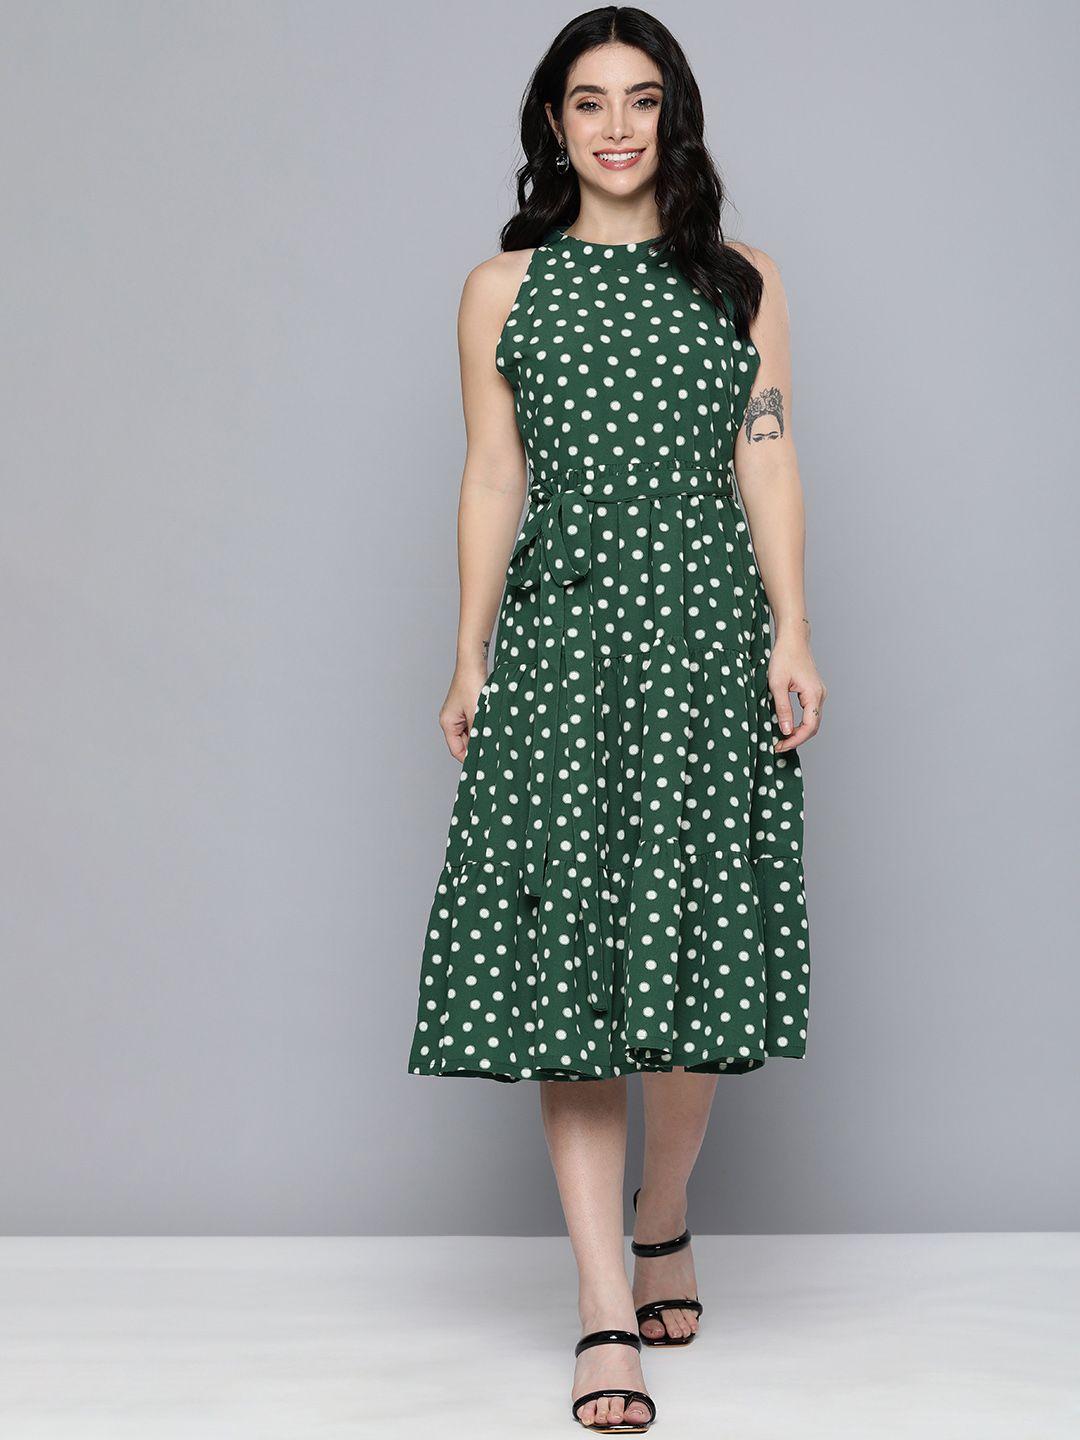 mast-&-harbour-green-&-white-polka-dots-printed-tiered-midi-fit-&-flare-dress